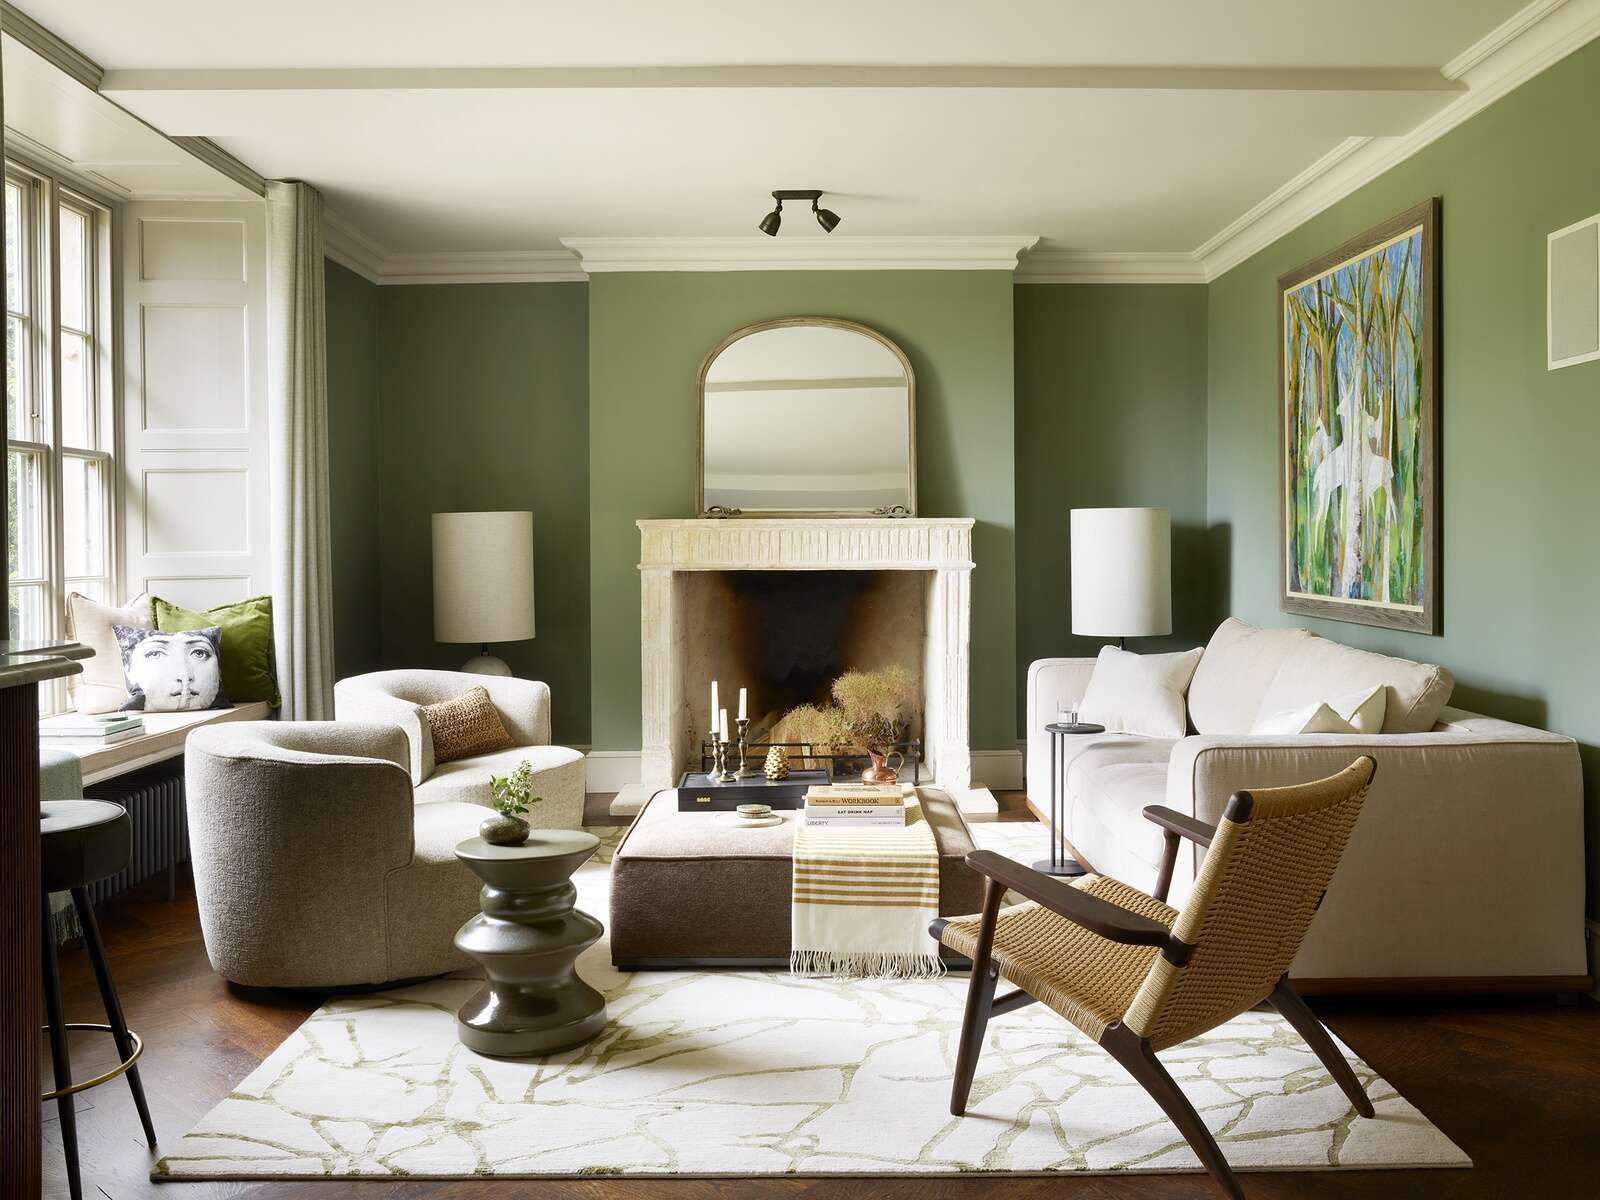 Design: Warm up your world by bringing new-season colour, texture and ...